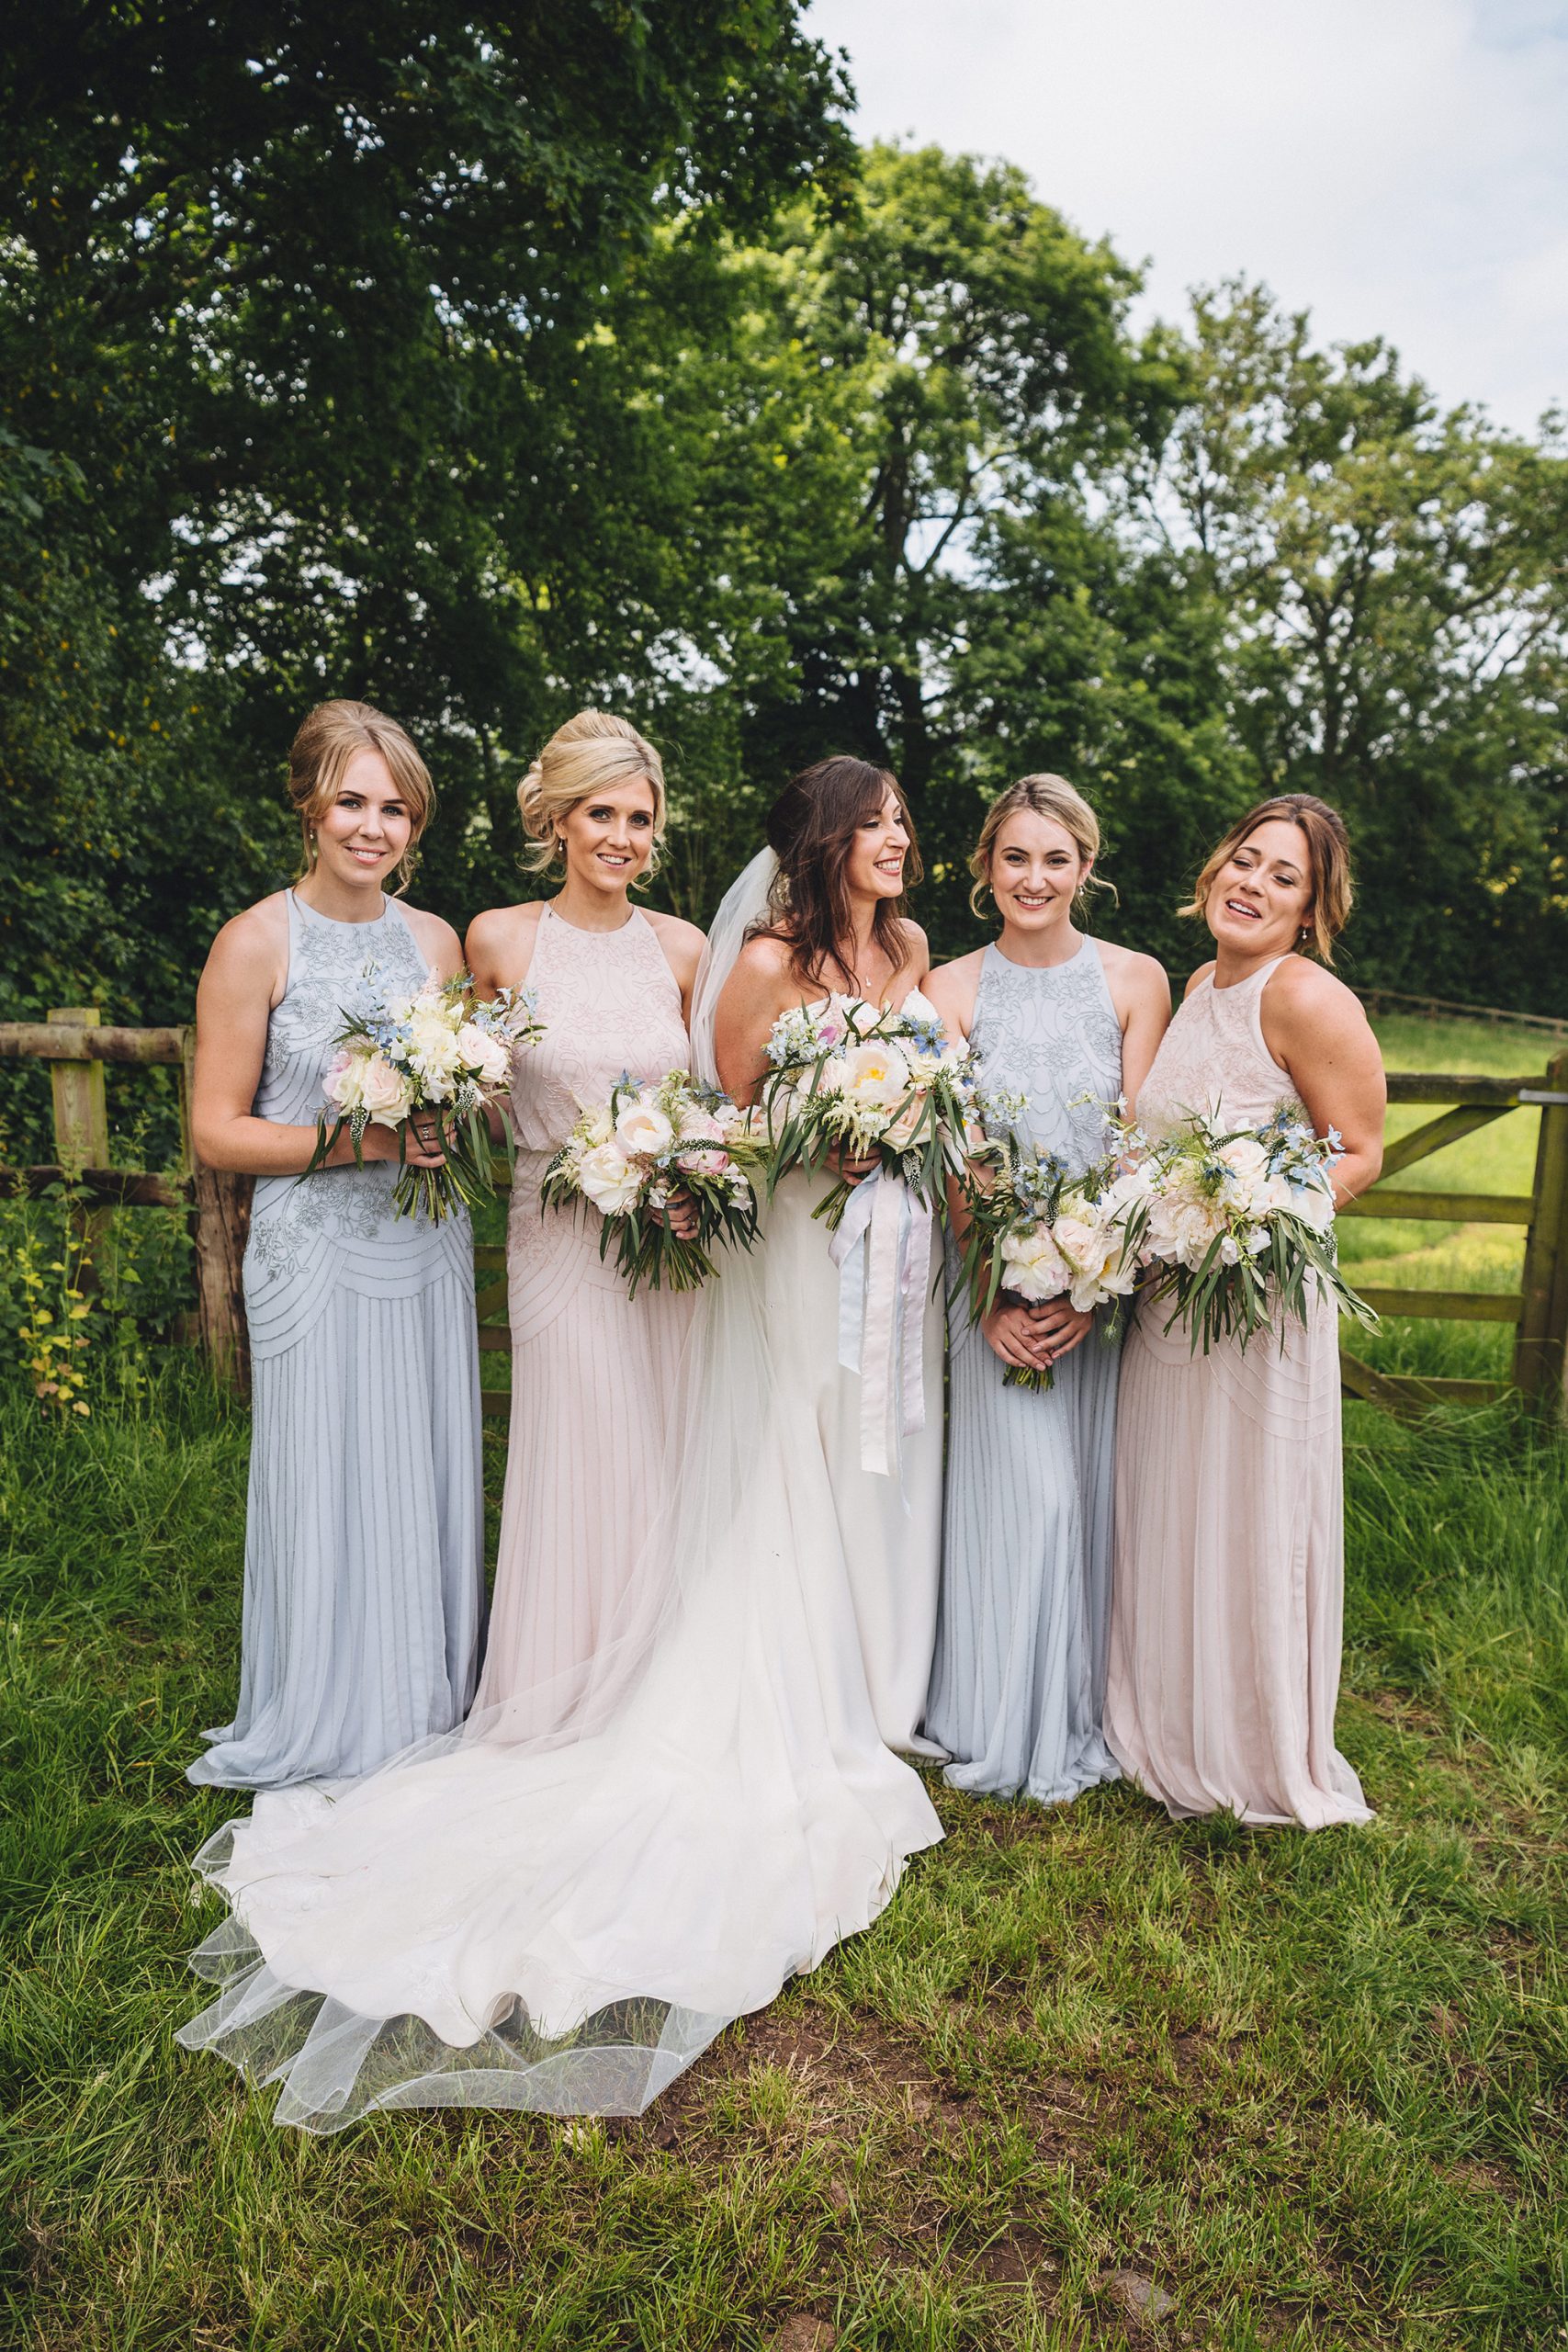 Kelly Will Rustic Country Wedding Marta May Photography SBS 010 scaled